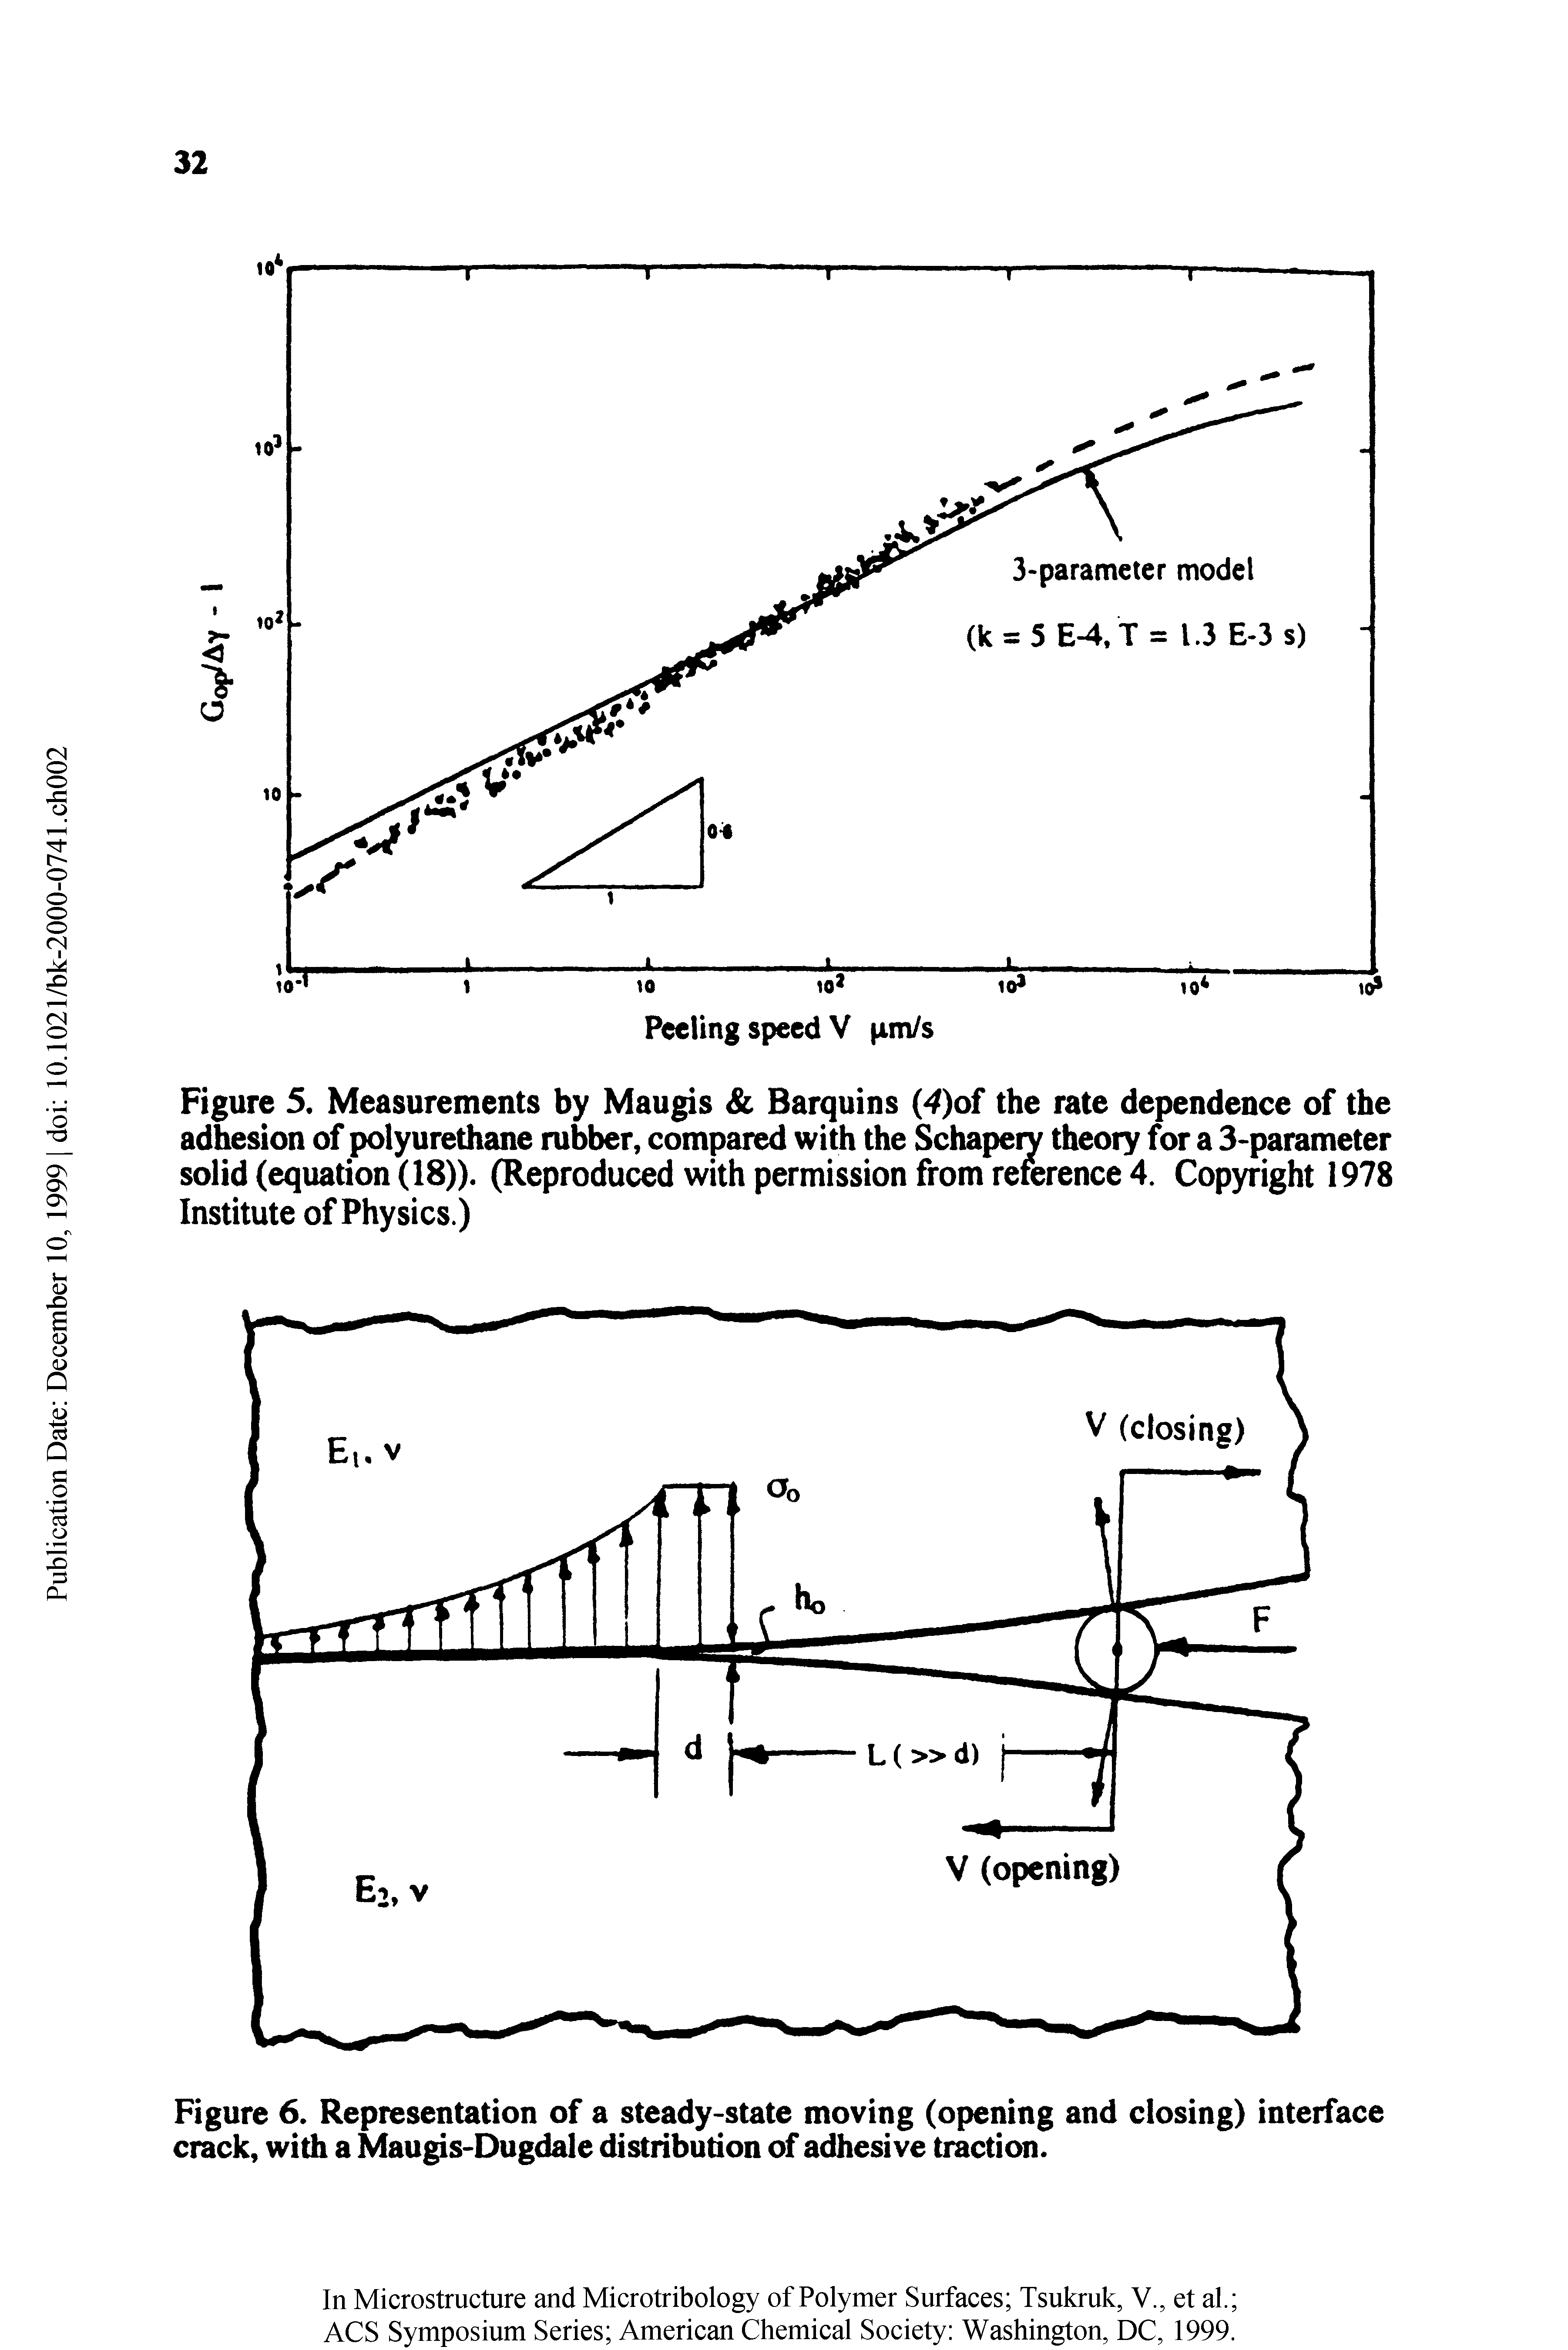 Figure 5. Measurements by Maugis Barquins (4)of the rate dependence of the adhesion of polyurethane rubber, compared with the Schapeiy theory for a 3-parameter solid (equation (18)). (Reproduced with permission from reference 4. Copyright 1978 Institute of Physics.)...